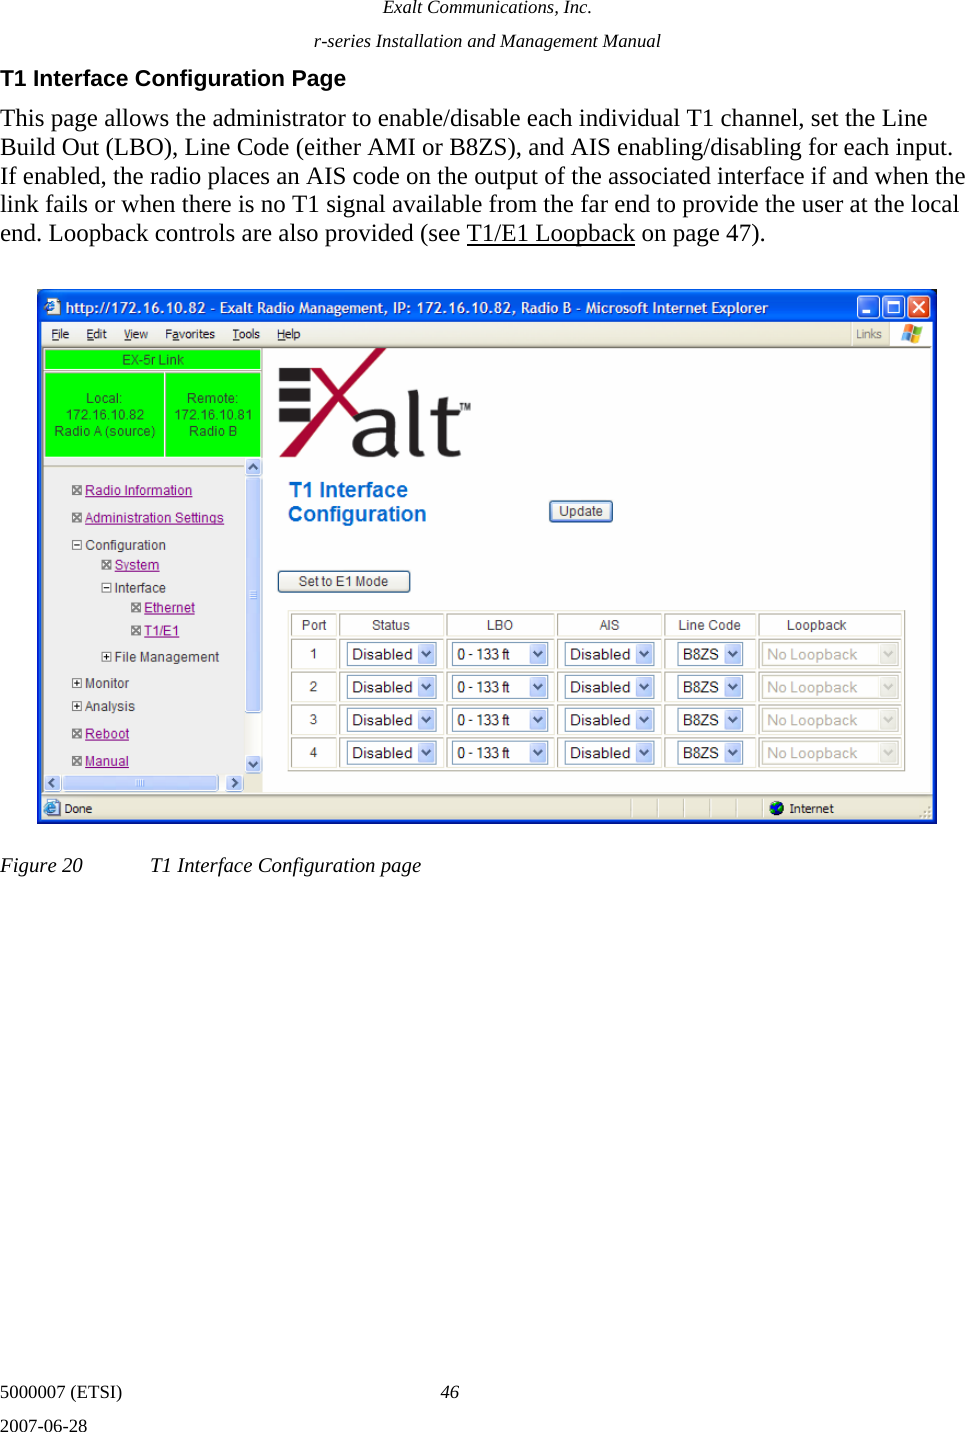 Exalt Communications, Inc. r-series Installation and Management Manual 5000007 (ETSI)  46 2007-06-28  T1 Interface Configuration Page This page allows the administrator to enable/disable each individual T1 channel, set the Line Build Out (LBO), Line Code (either AMI or B8ZS), and AIS enabling/disabling for each input. If enabled, the radio places an AIS code on the output of the associated interface if and when the link fails or when there is no T1 signal available from the far end to provide the user at the local end. Loopback controls are also provided (see T1/E1 Loopback on page 47). Figure 20  T1 Interface Configuration page 